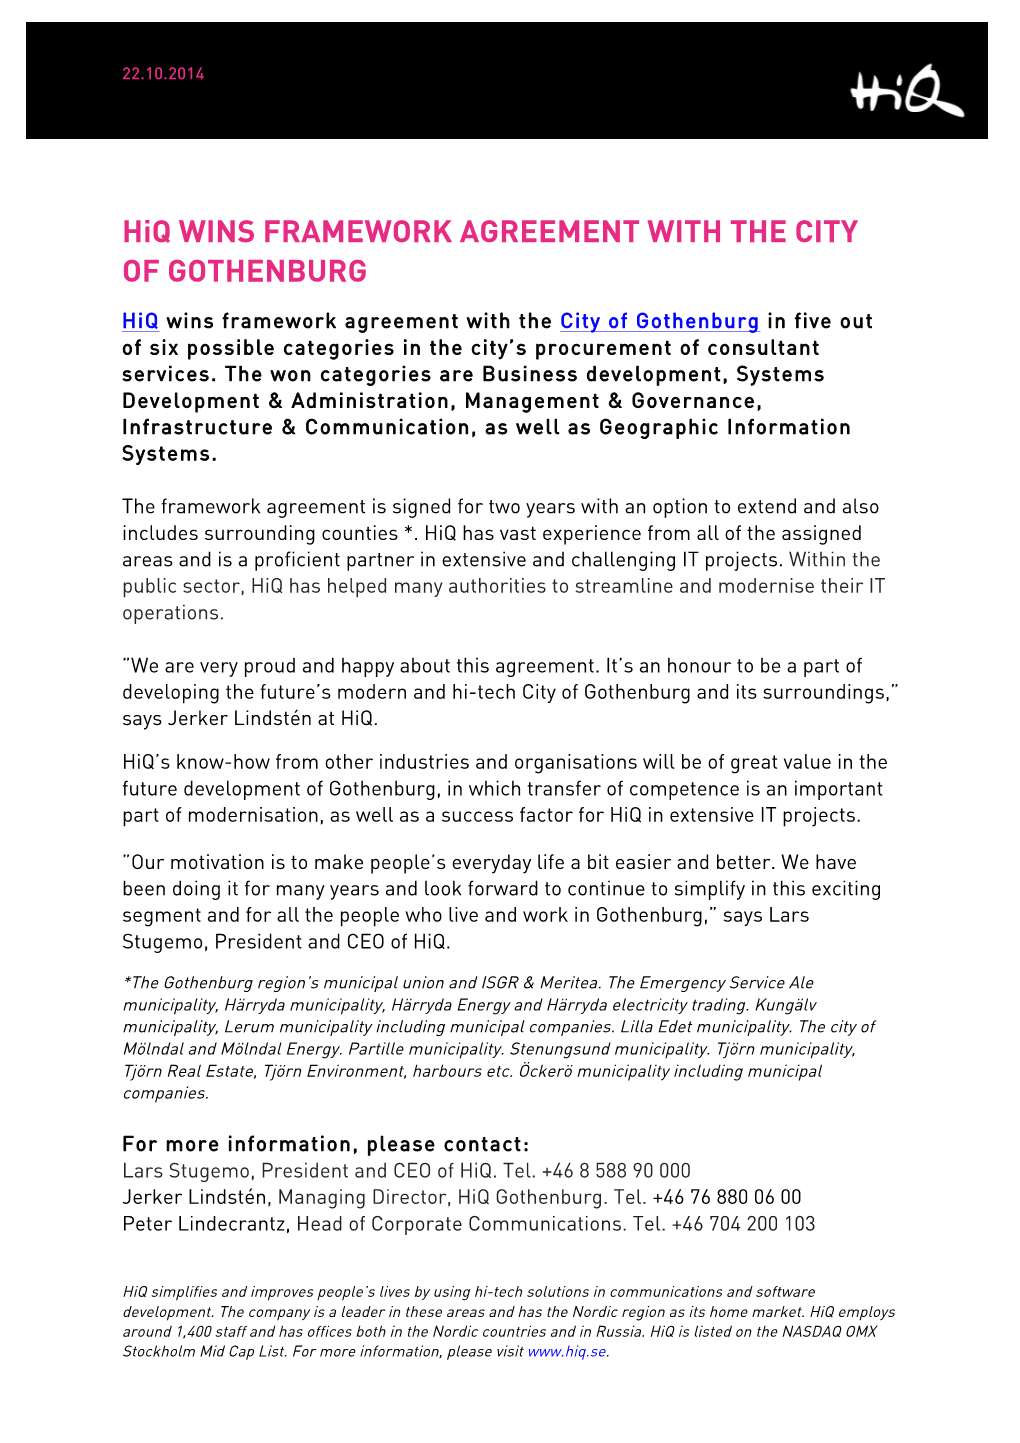 Hiq WINS FRAMEWORK AGREEMENT with the CITY of GOTHENBURG